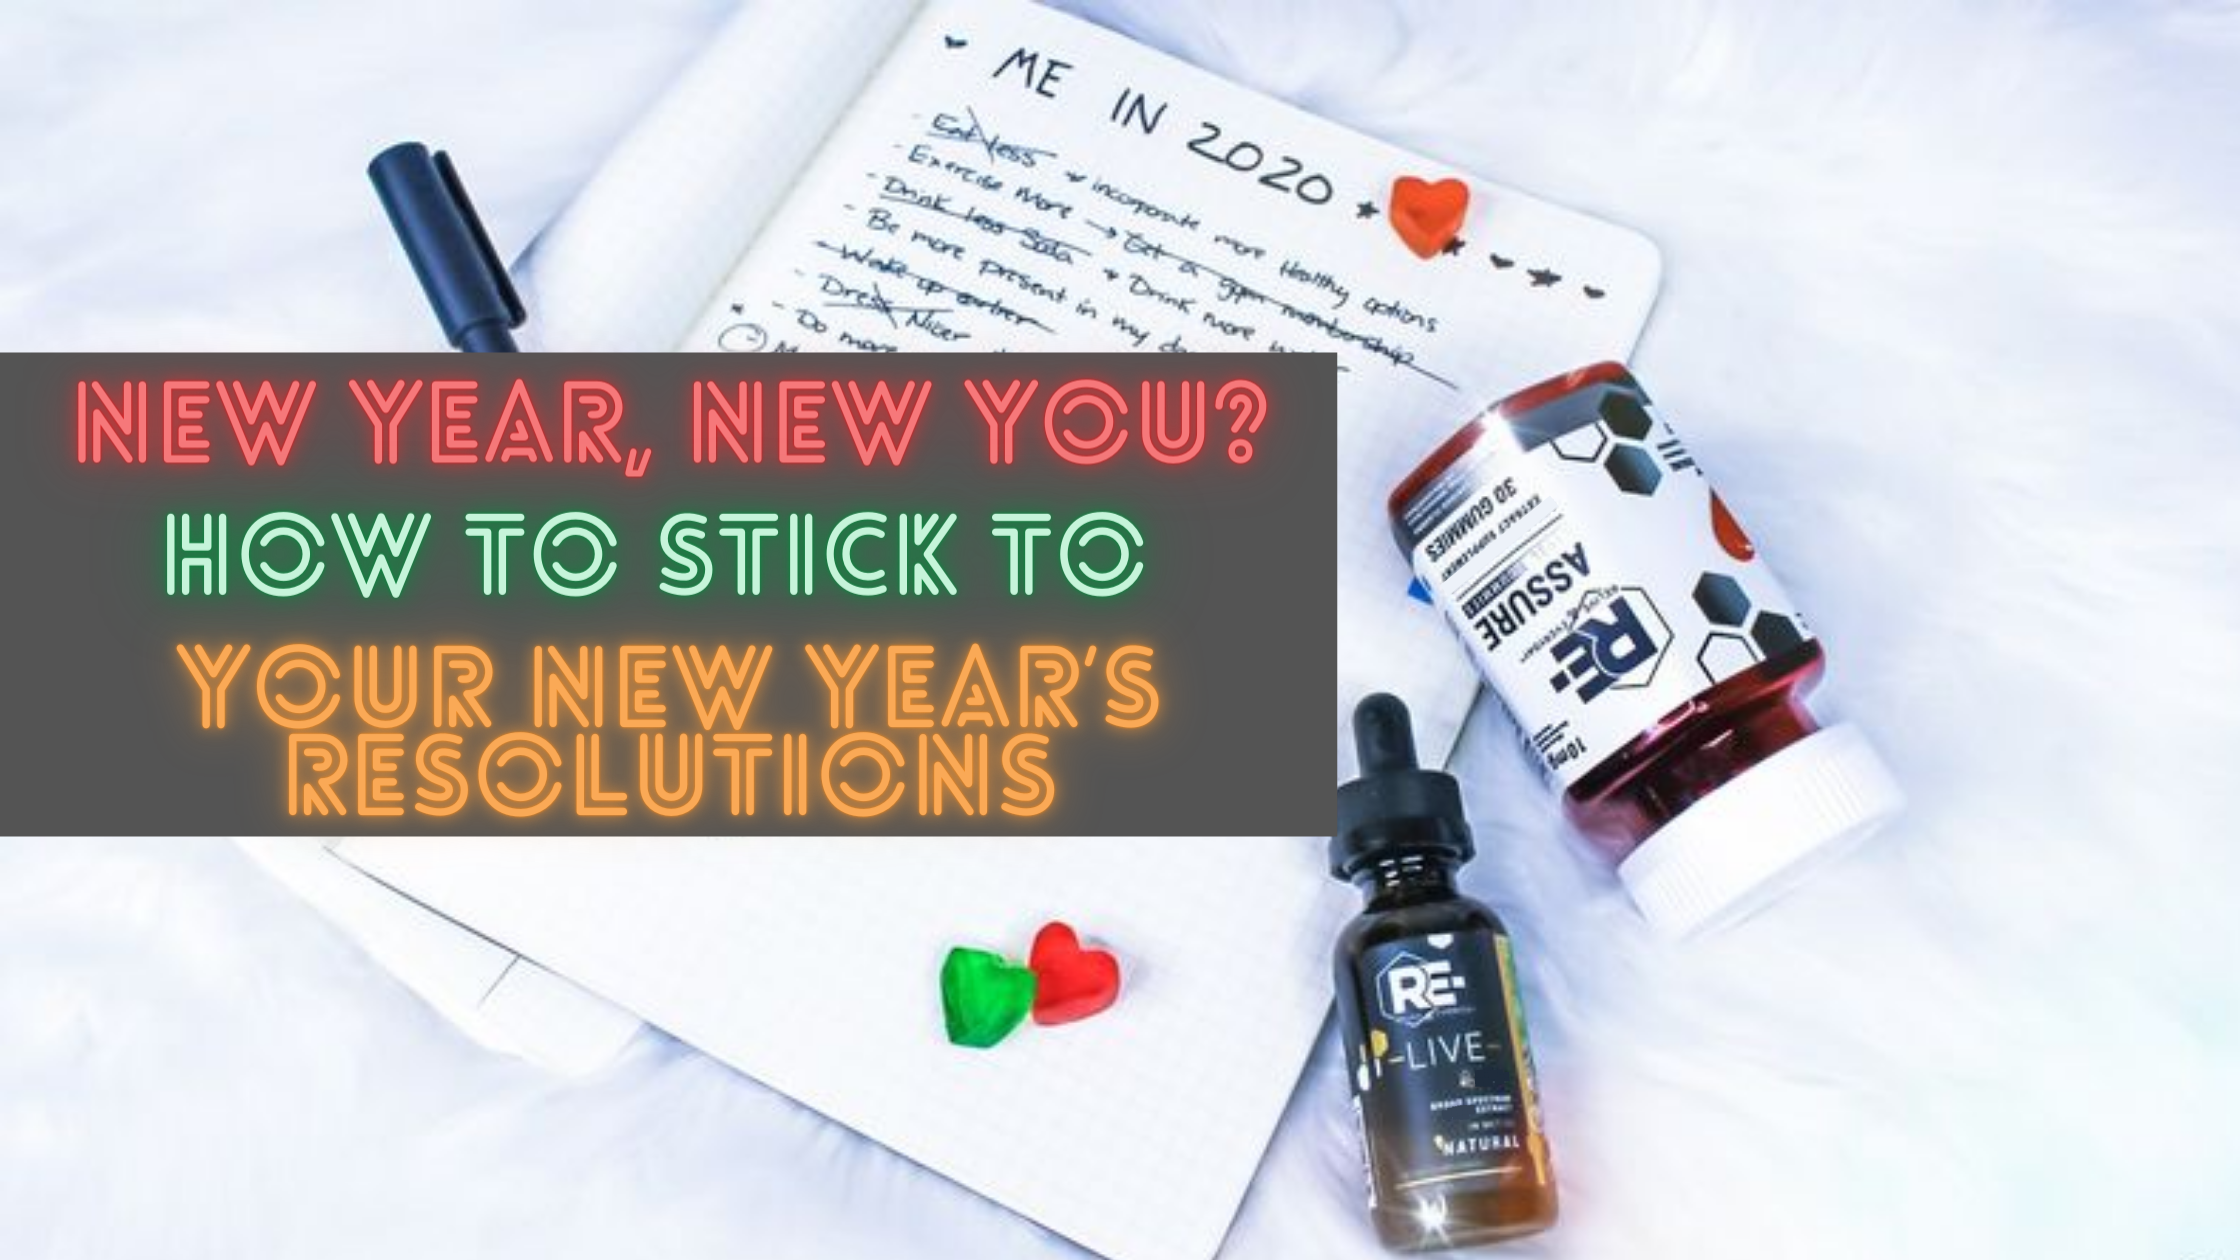 NEW YEAR, NEW YOU USING Plant-Based TO STICK TO YOUR NEW YEAR’S RESOLUTIONS